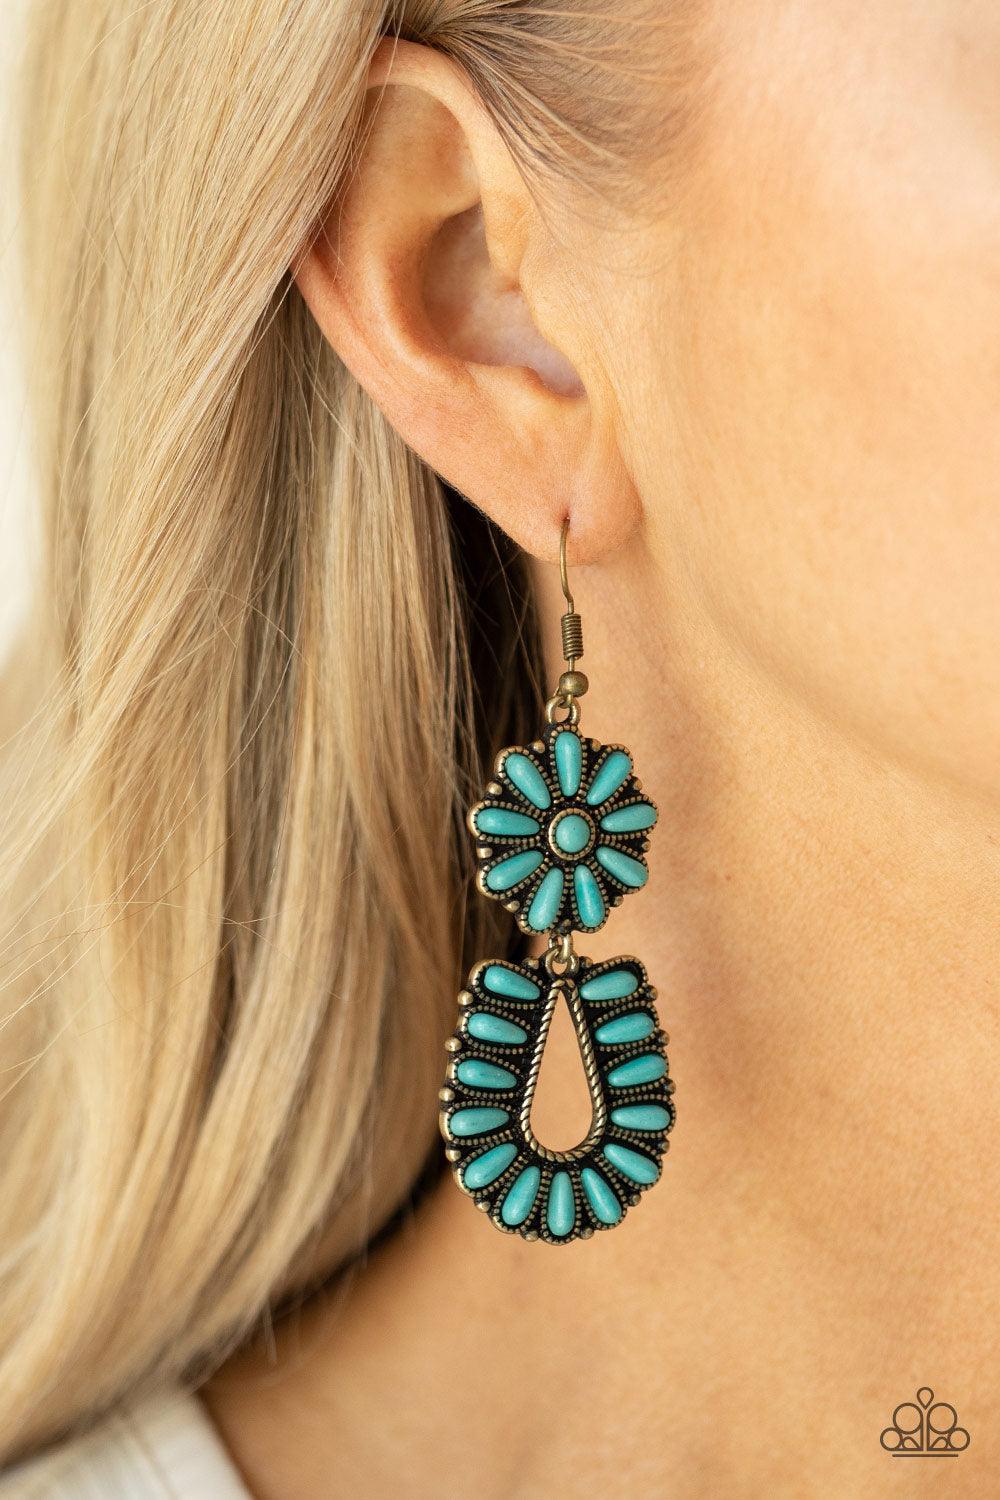 Paparazzi Accessories Badlands Eden - Brass Infused with studded brass fittings, two turquoise stone frames connect into a squash blossom for an authentically southwestern inspired look. Earring attaches to a standard fishhook fitting. Sold as one pair of